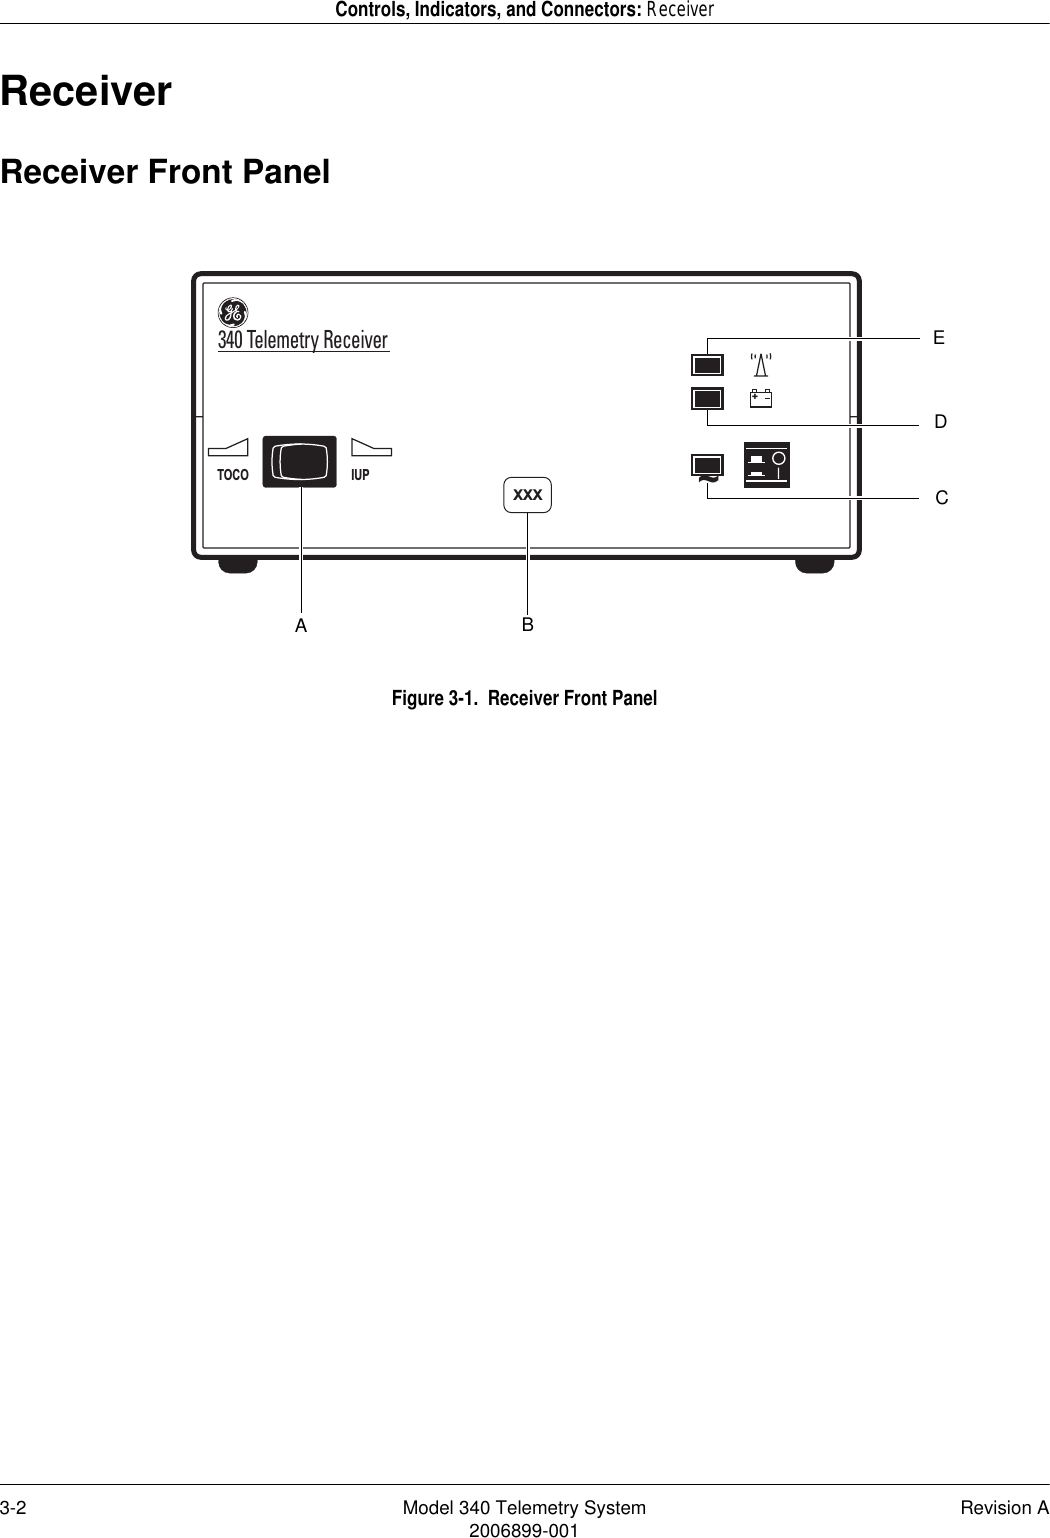 3-2 Model 340 Telemetry System Revision A2006899-001Controls, Indicators, and Connectors: ReceiverReceiverReceiver Front PanelFigure 3-1.  Receiver Front PanelIUPTOCO+~XXX340 Telemetry ReceiverABCDE